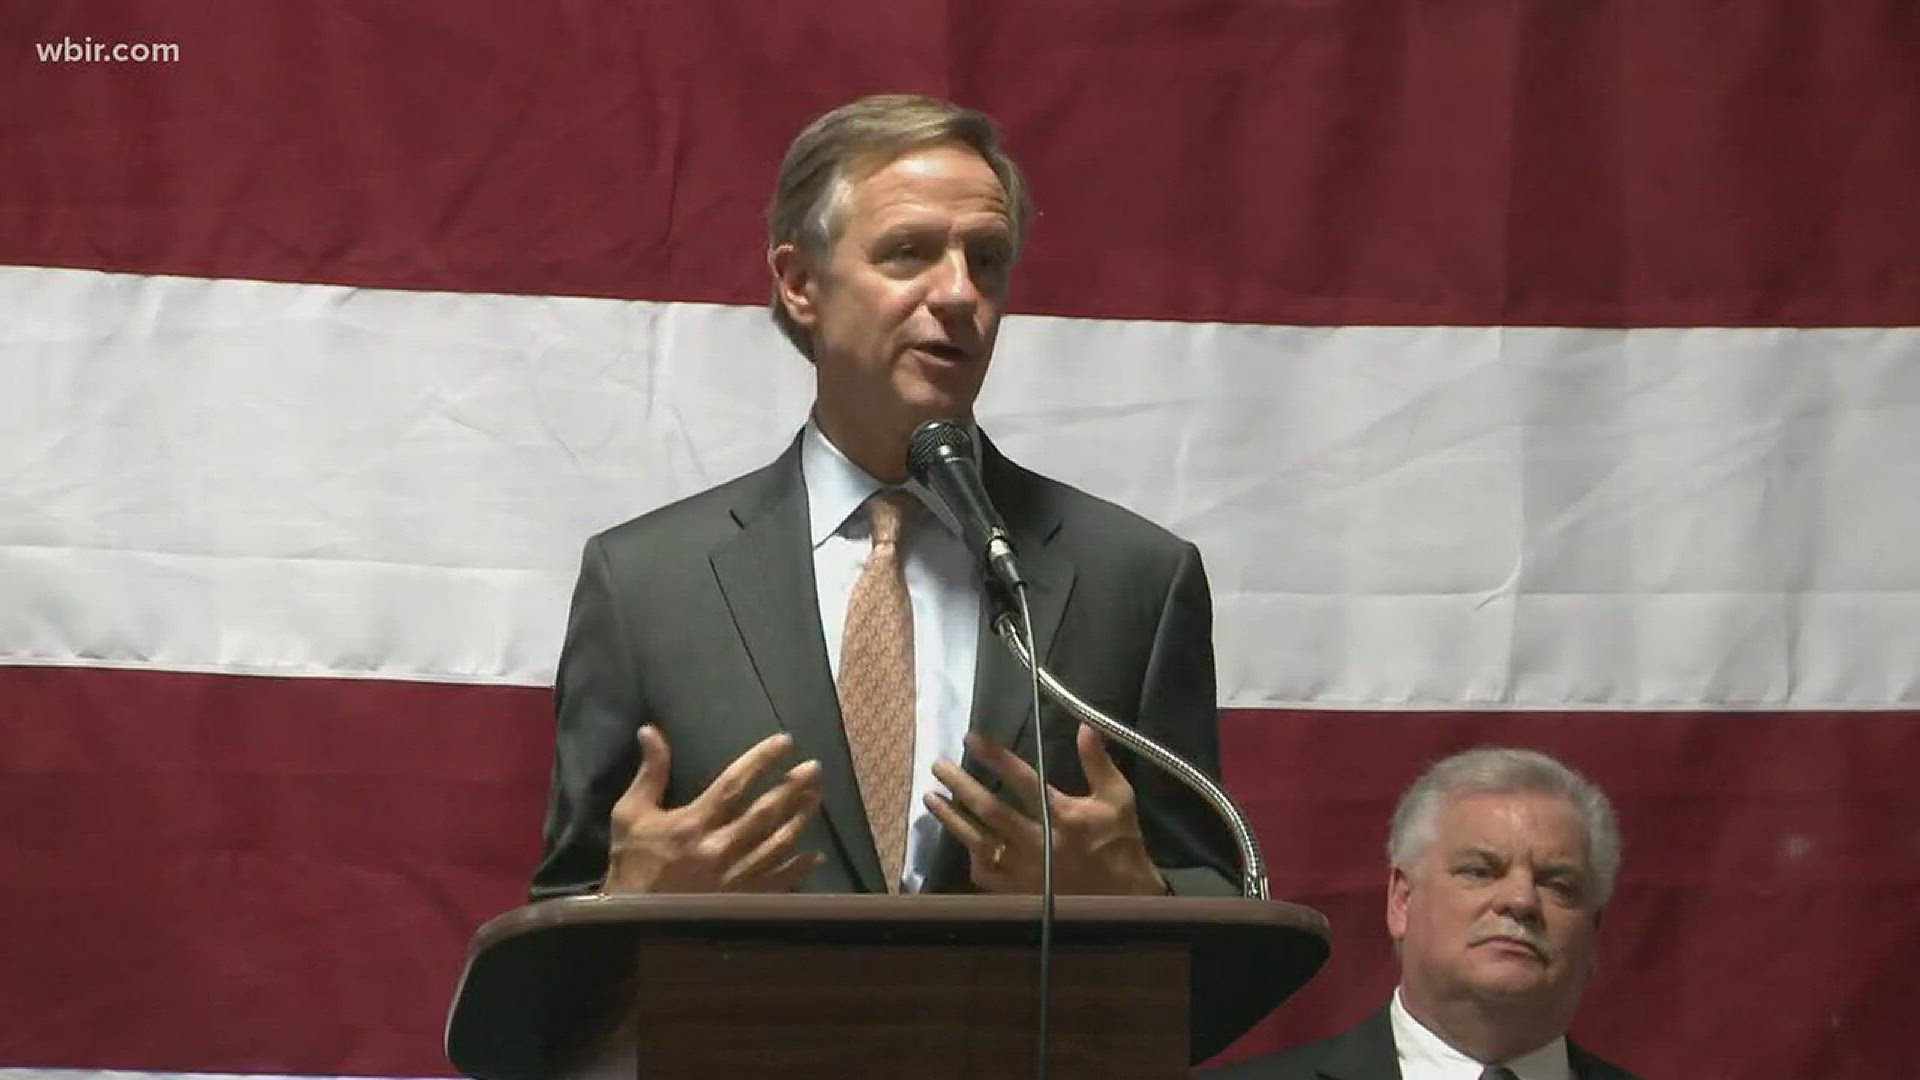 Feb. 20, 2018: Gov. Bill Haslam said the state will begin a review of security measures at Tennessee schools.